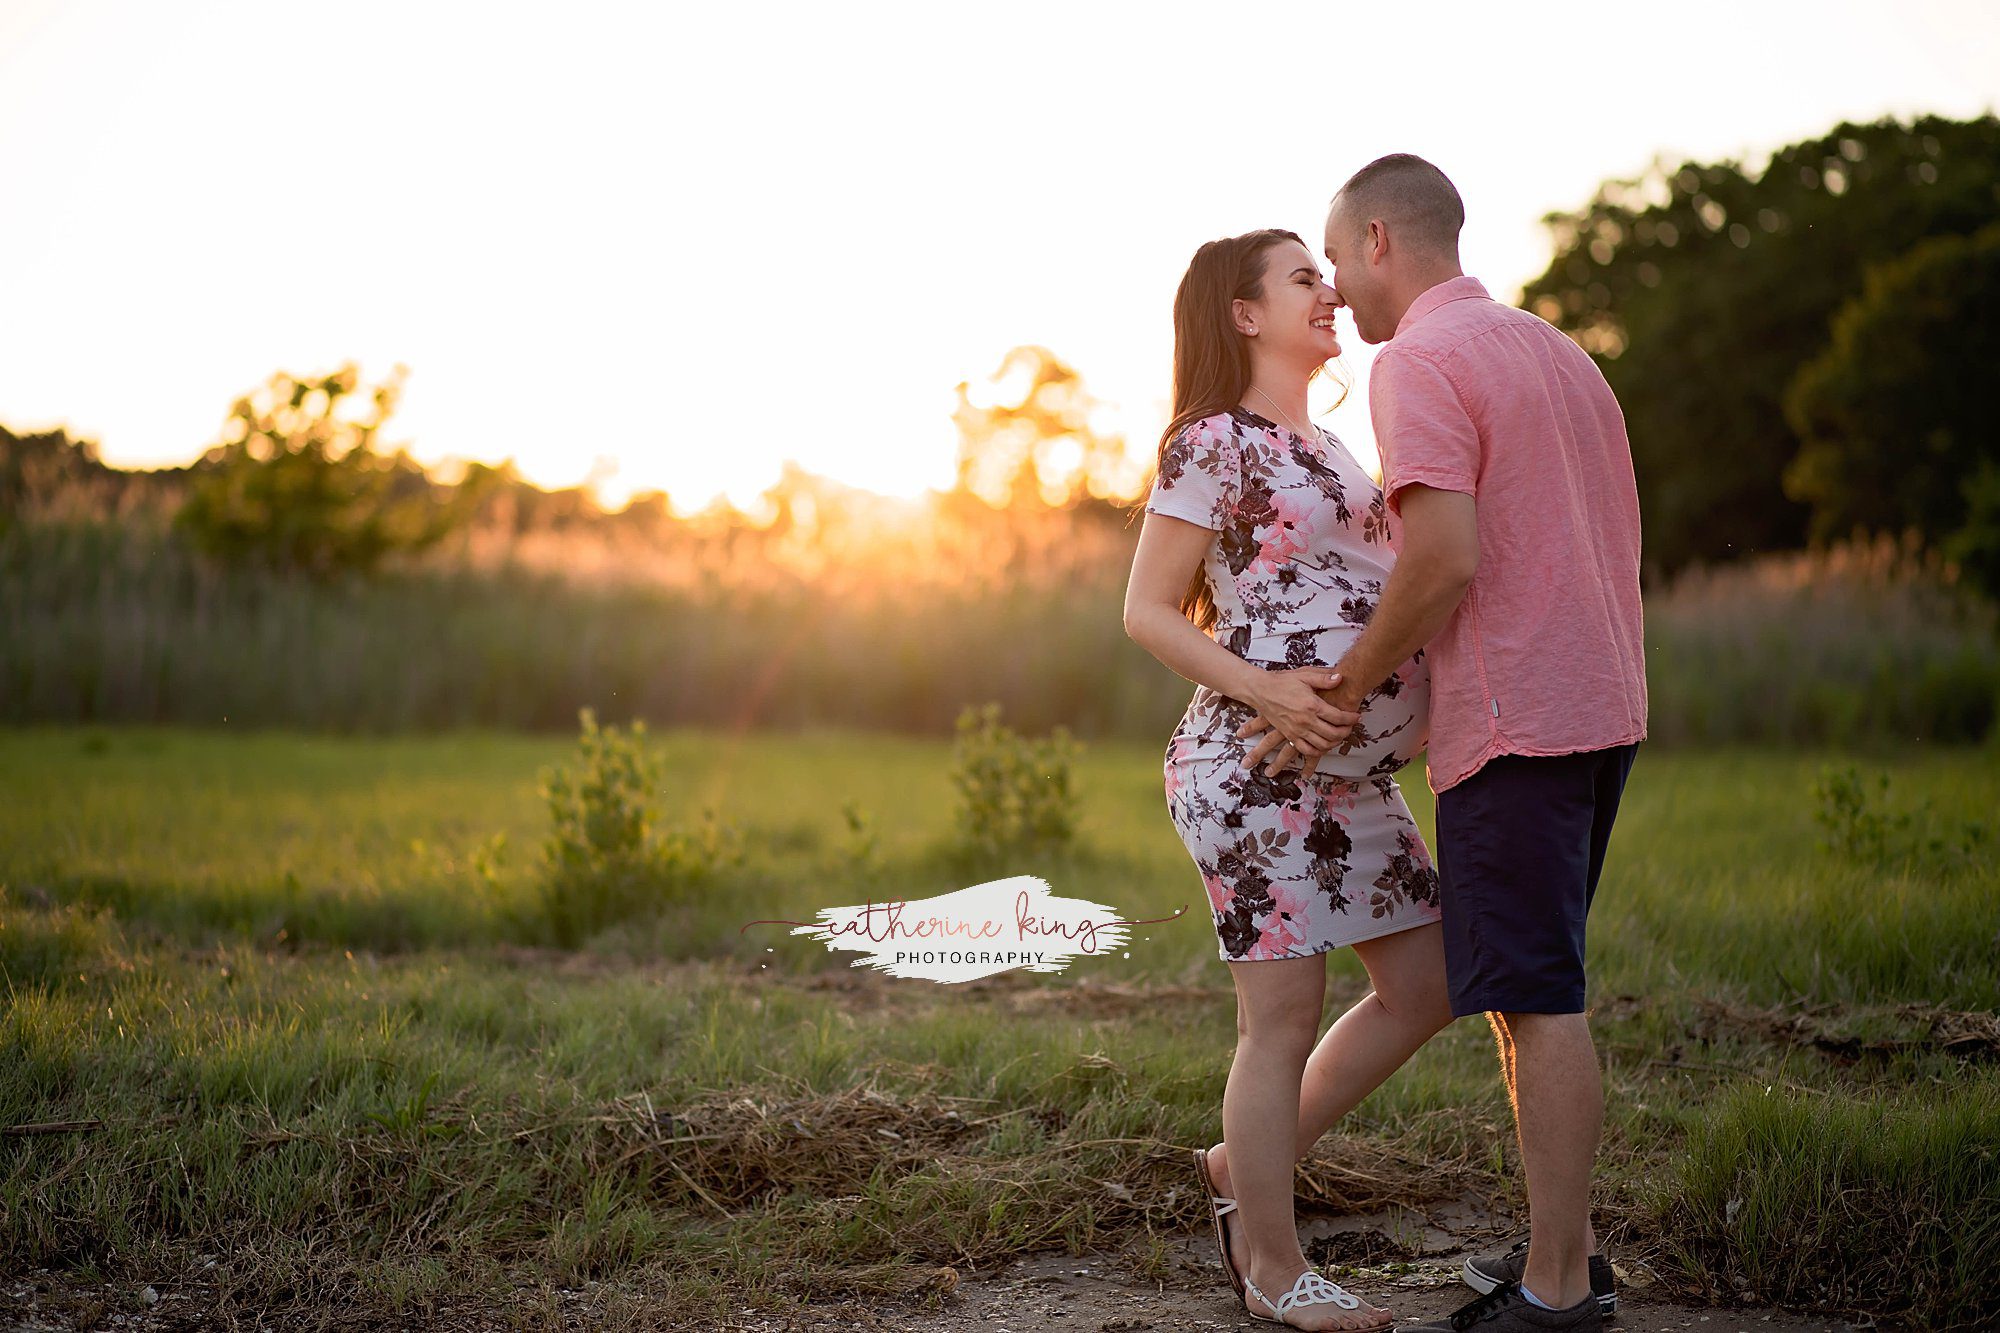 Gorgeous sunset maternity photography session at Chaffinch Island in Guilford, CT